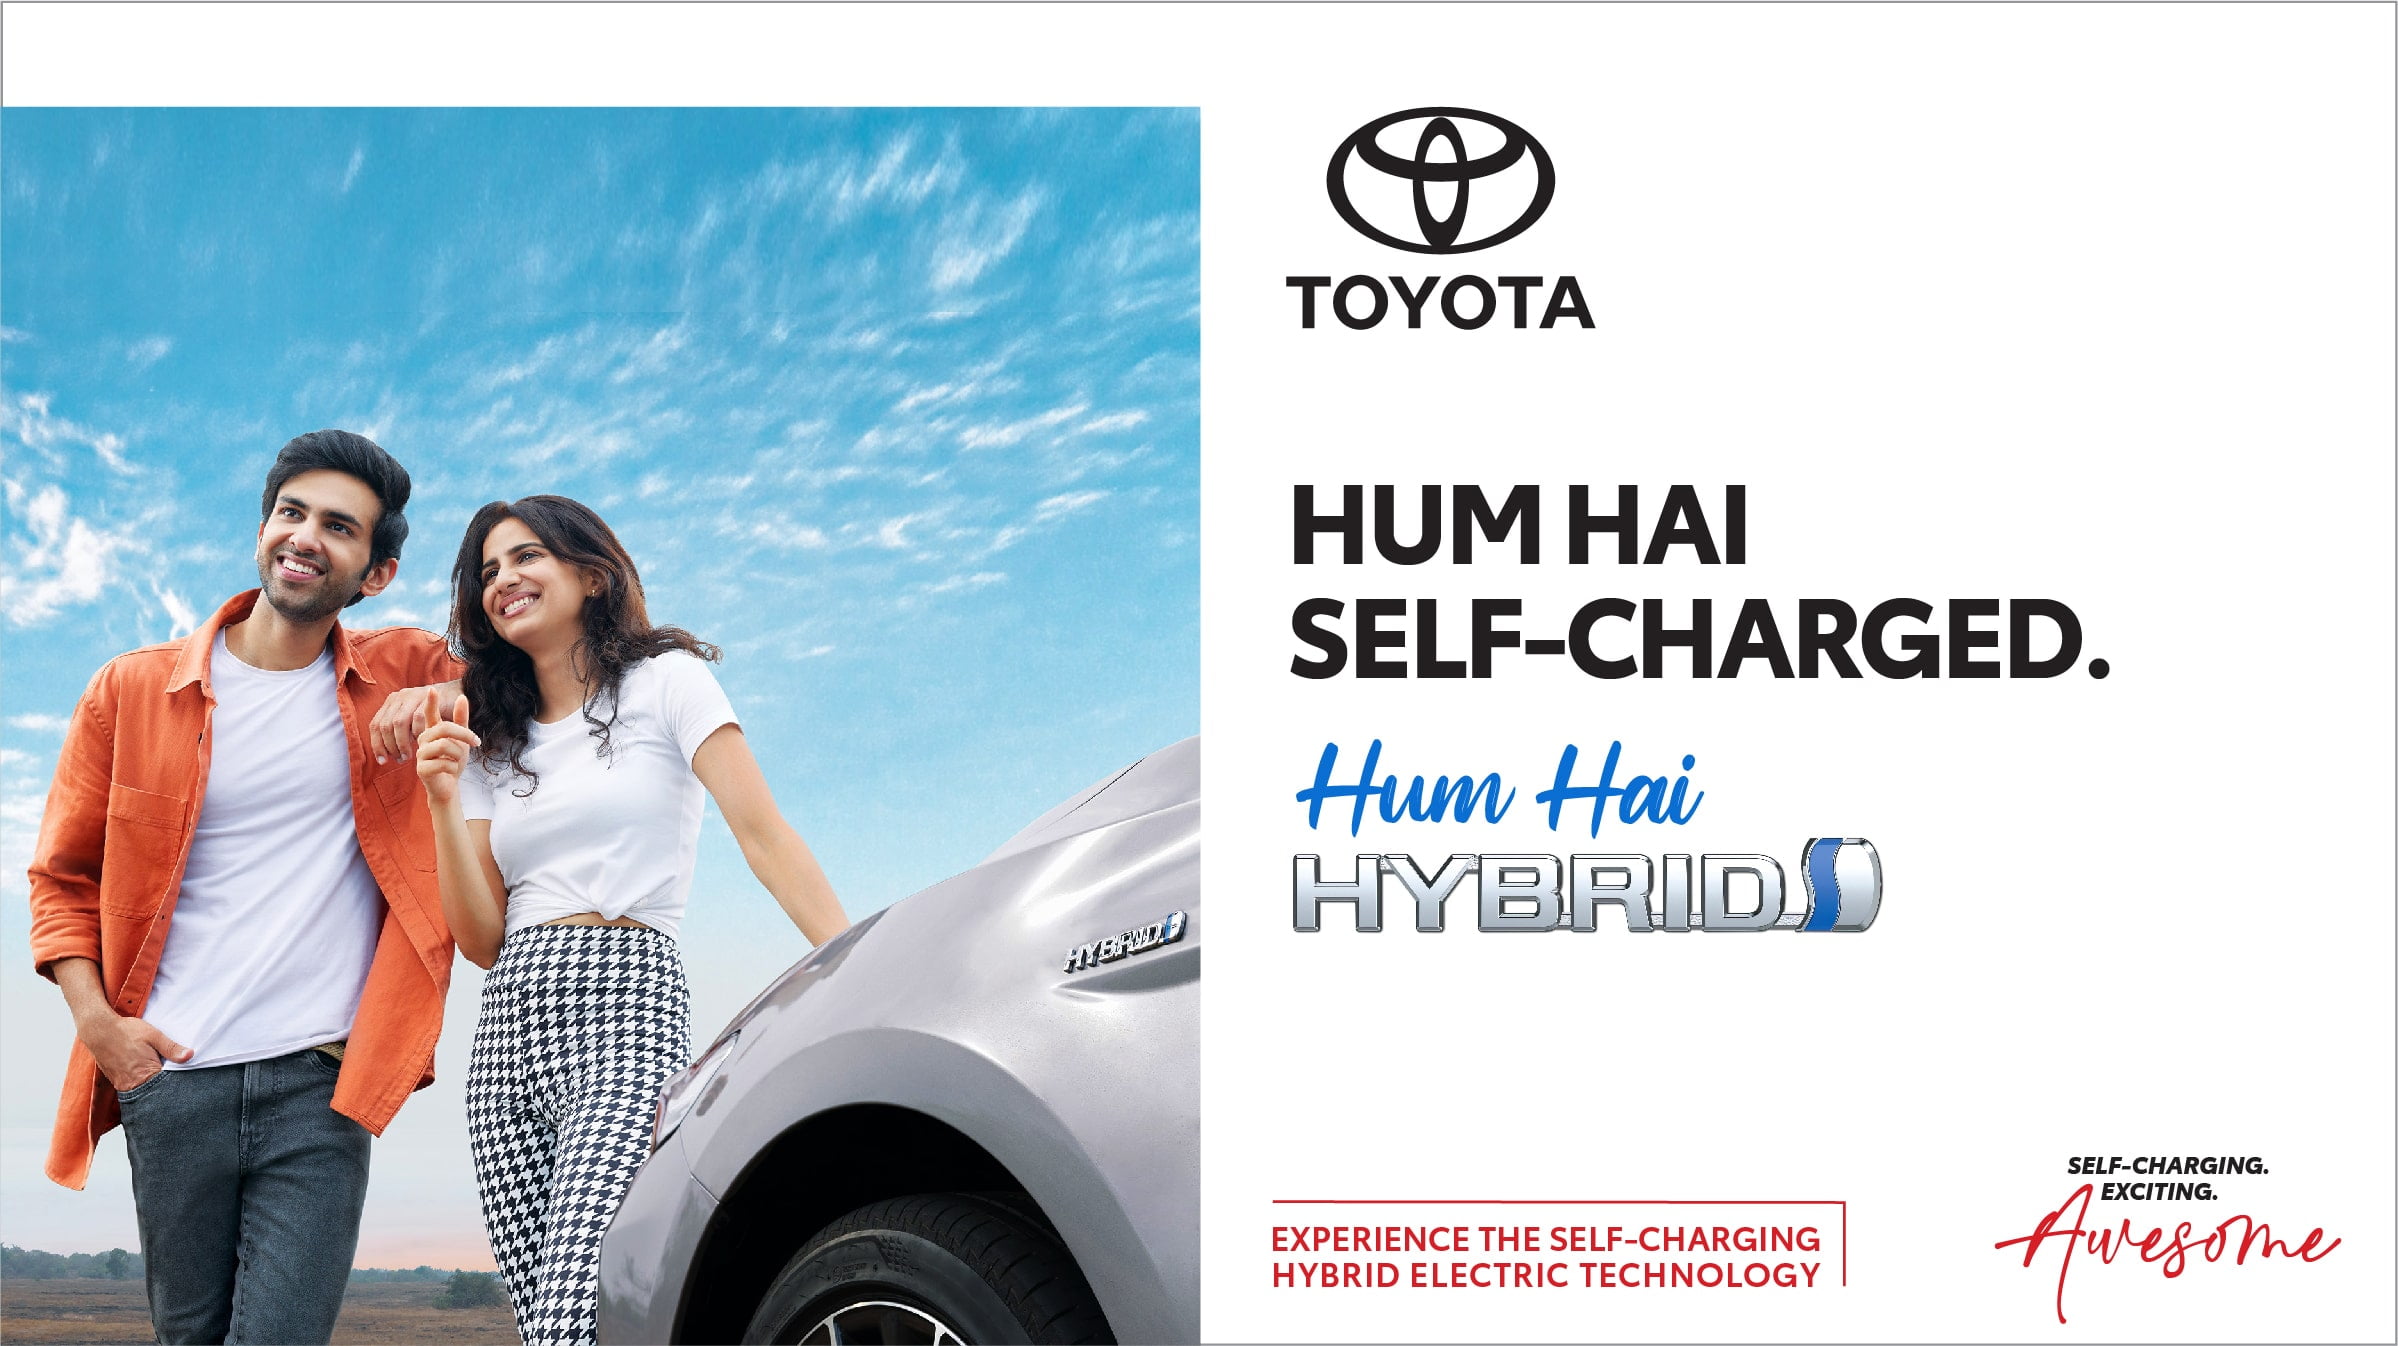 TKM Launches ‘Hum Hai Hybrid’ Campaign on Self-Charging Hybrid Electric Vehicle Technology